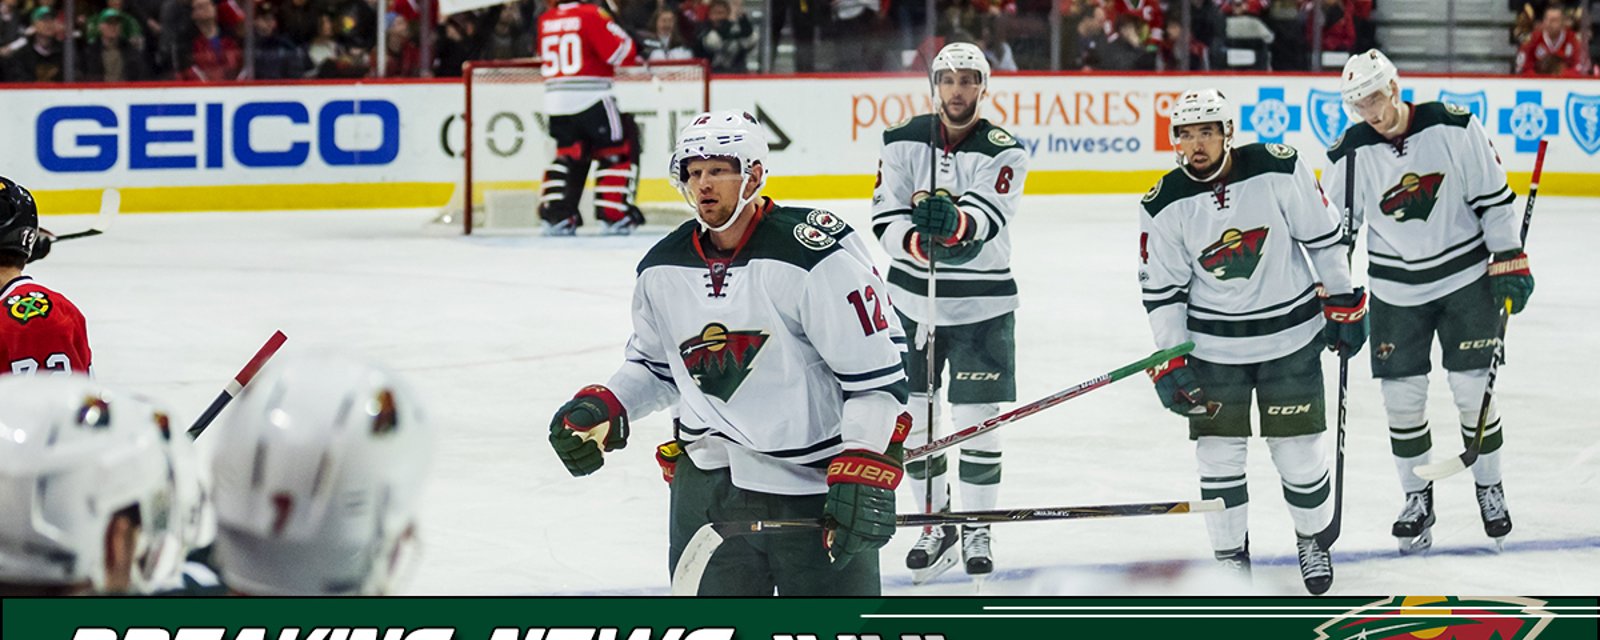 Breaking: Minnesota Wild's player on the verge of making a return!